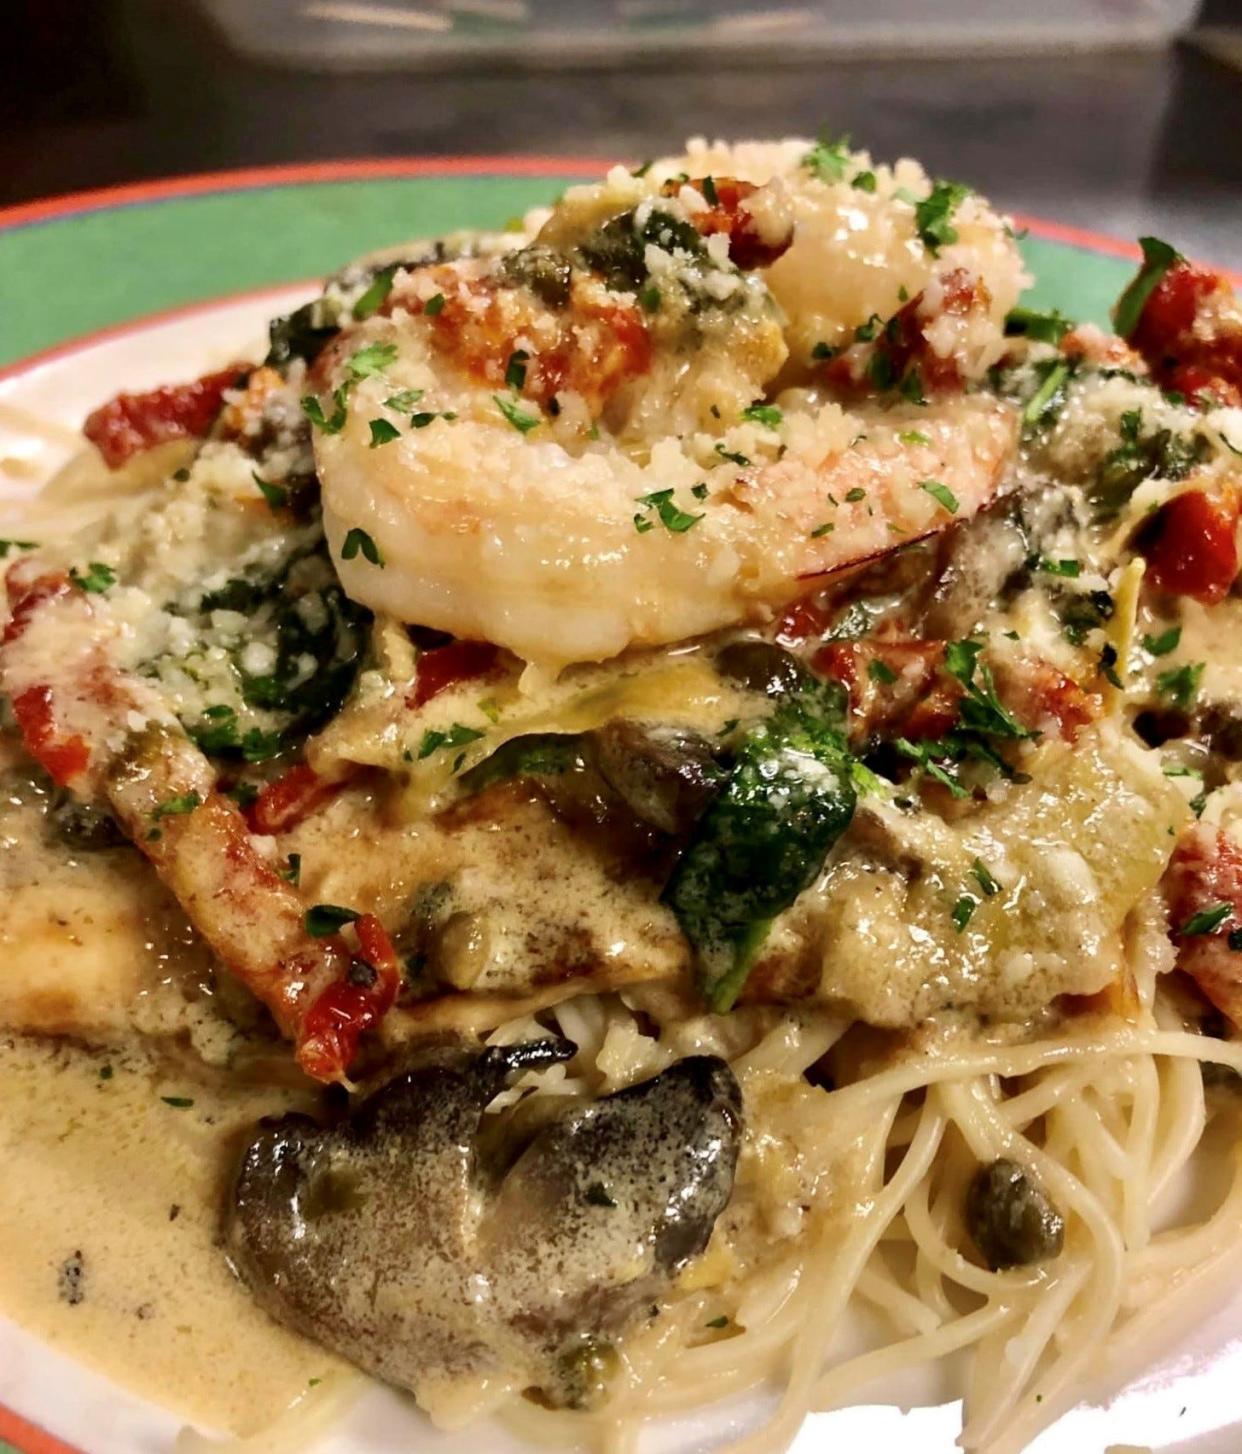 Chicken and shrimp over pasta is a favorite dish at Cerami’s in Flowood.